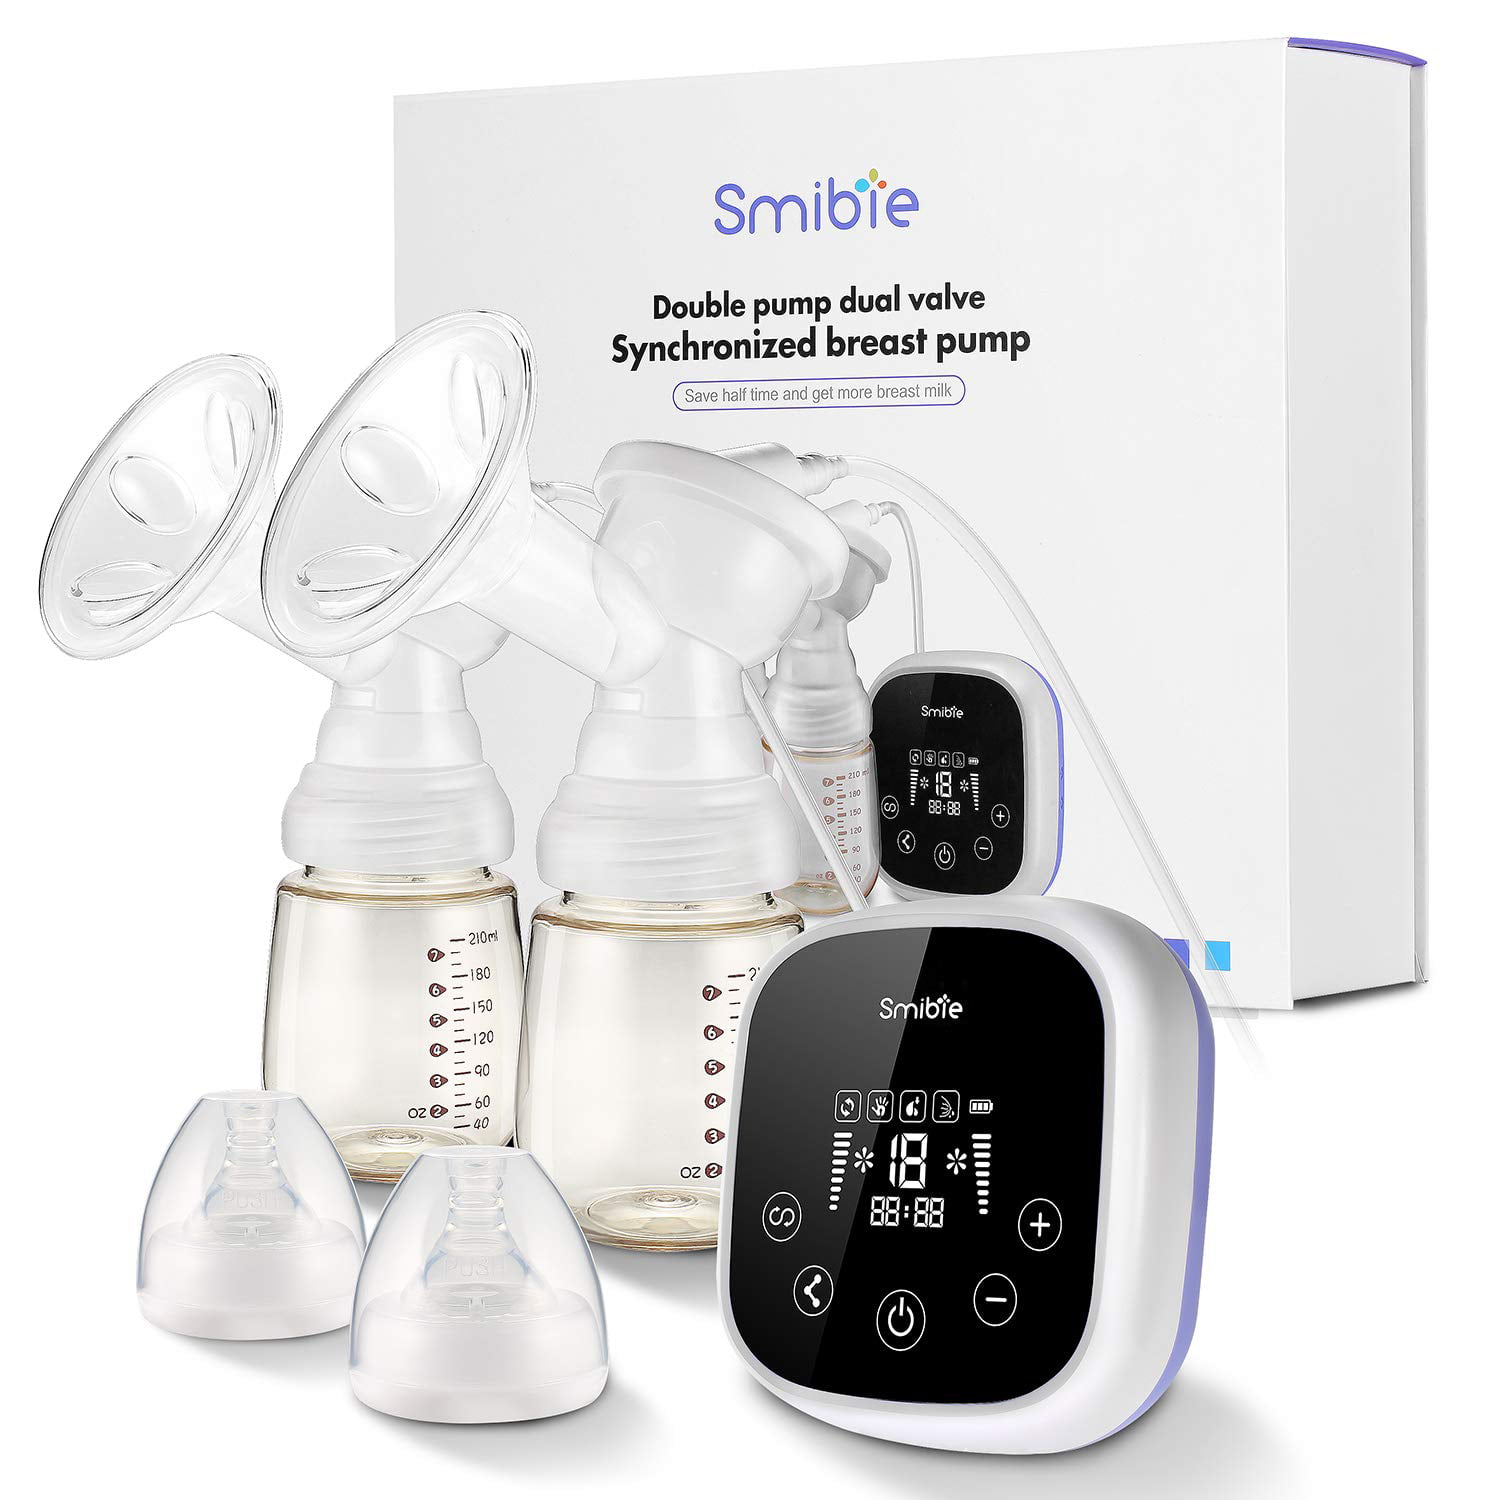 V.I.P. Smibie Pain Free Breast Pump 18 Levels 4 Different Modes Double Electric Breast Pump Smart LED Touch Screen Breastfeeding Milk Memory Function, Ultra-Quiet, Portable, Purple